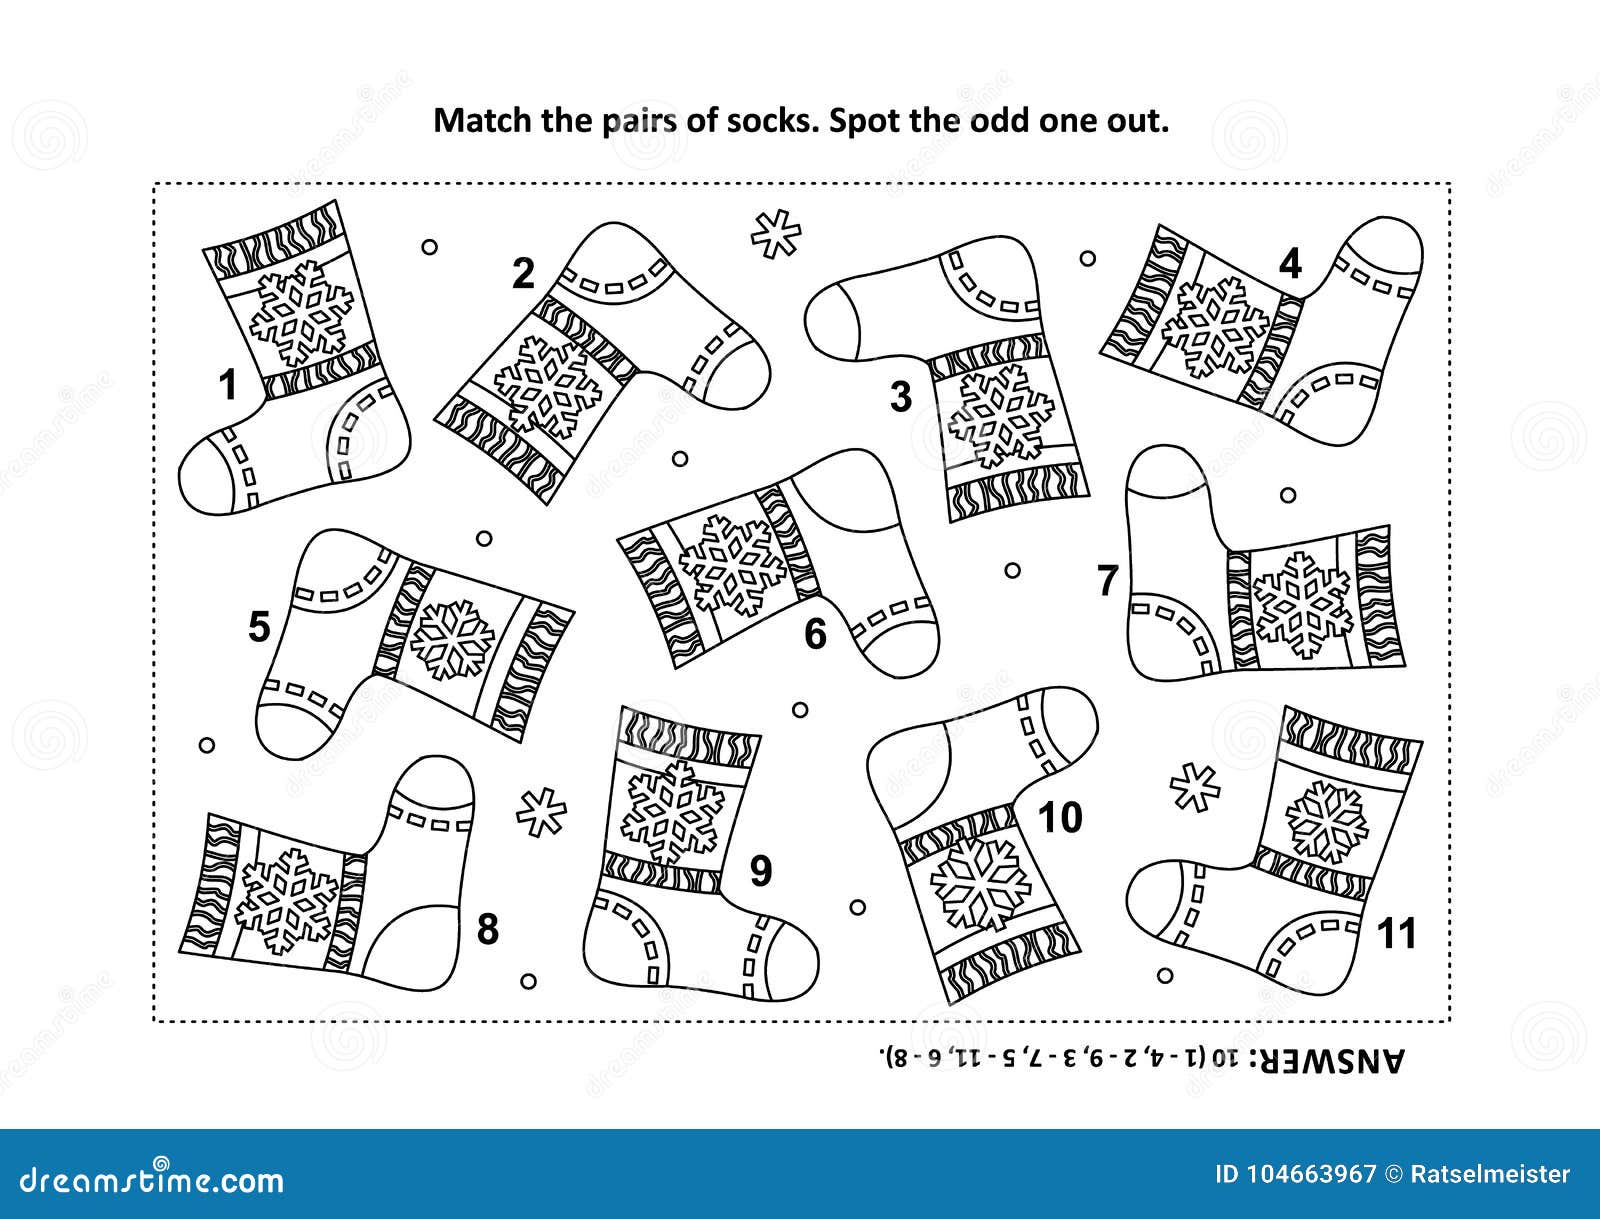 visual logic puzzle and coloring page with knitted socks